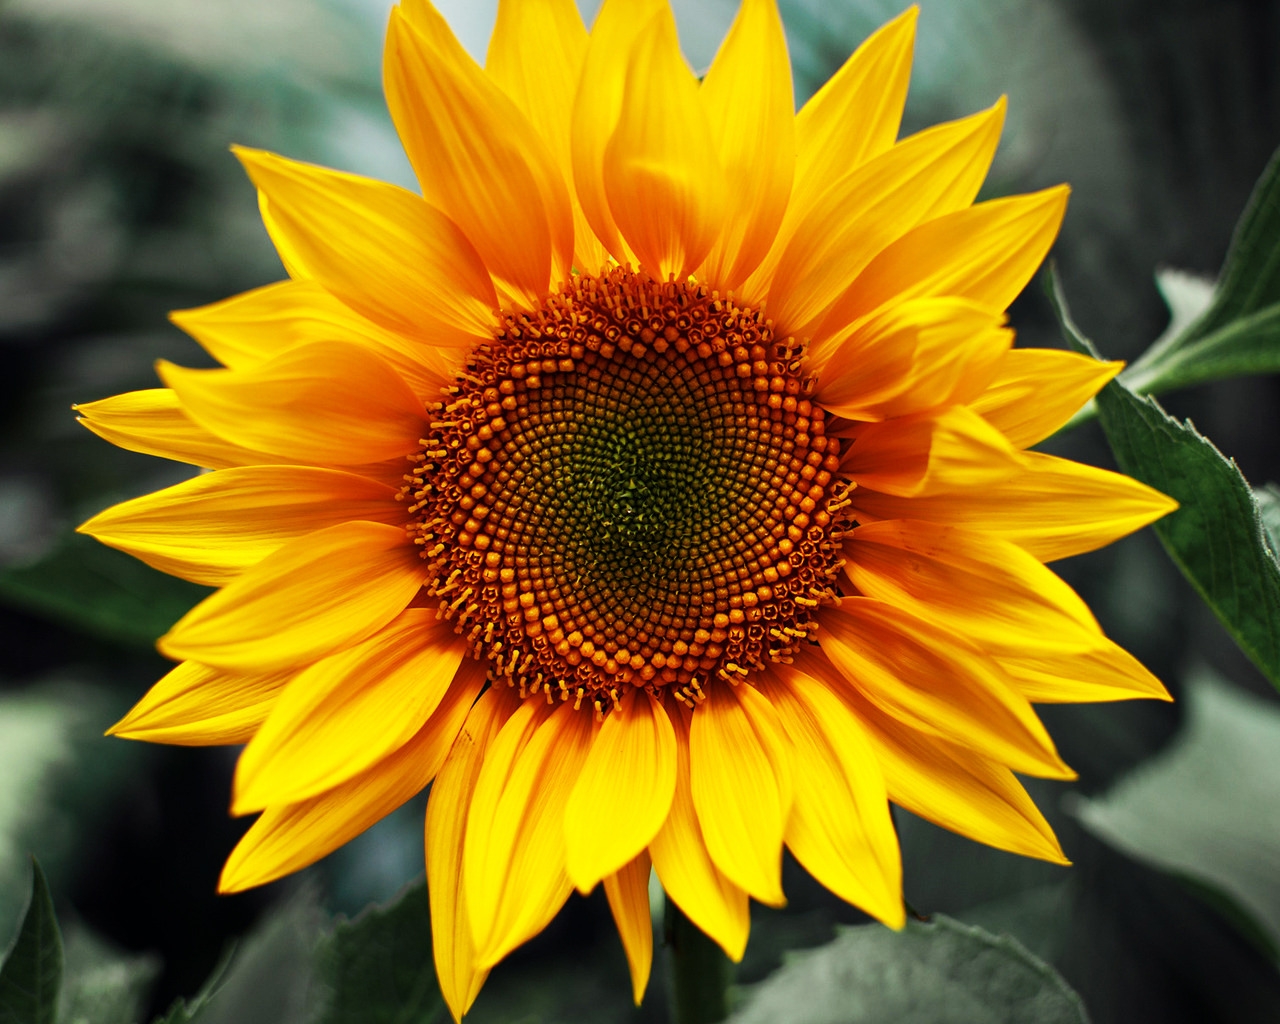 Just Sunflower for 1280 x 1024 resolution